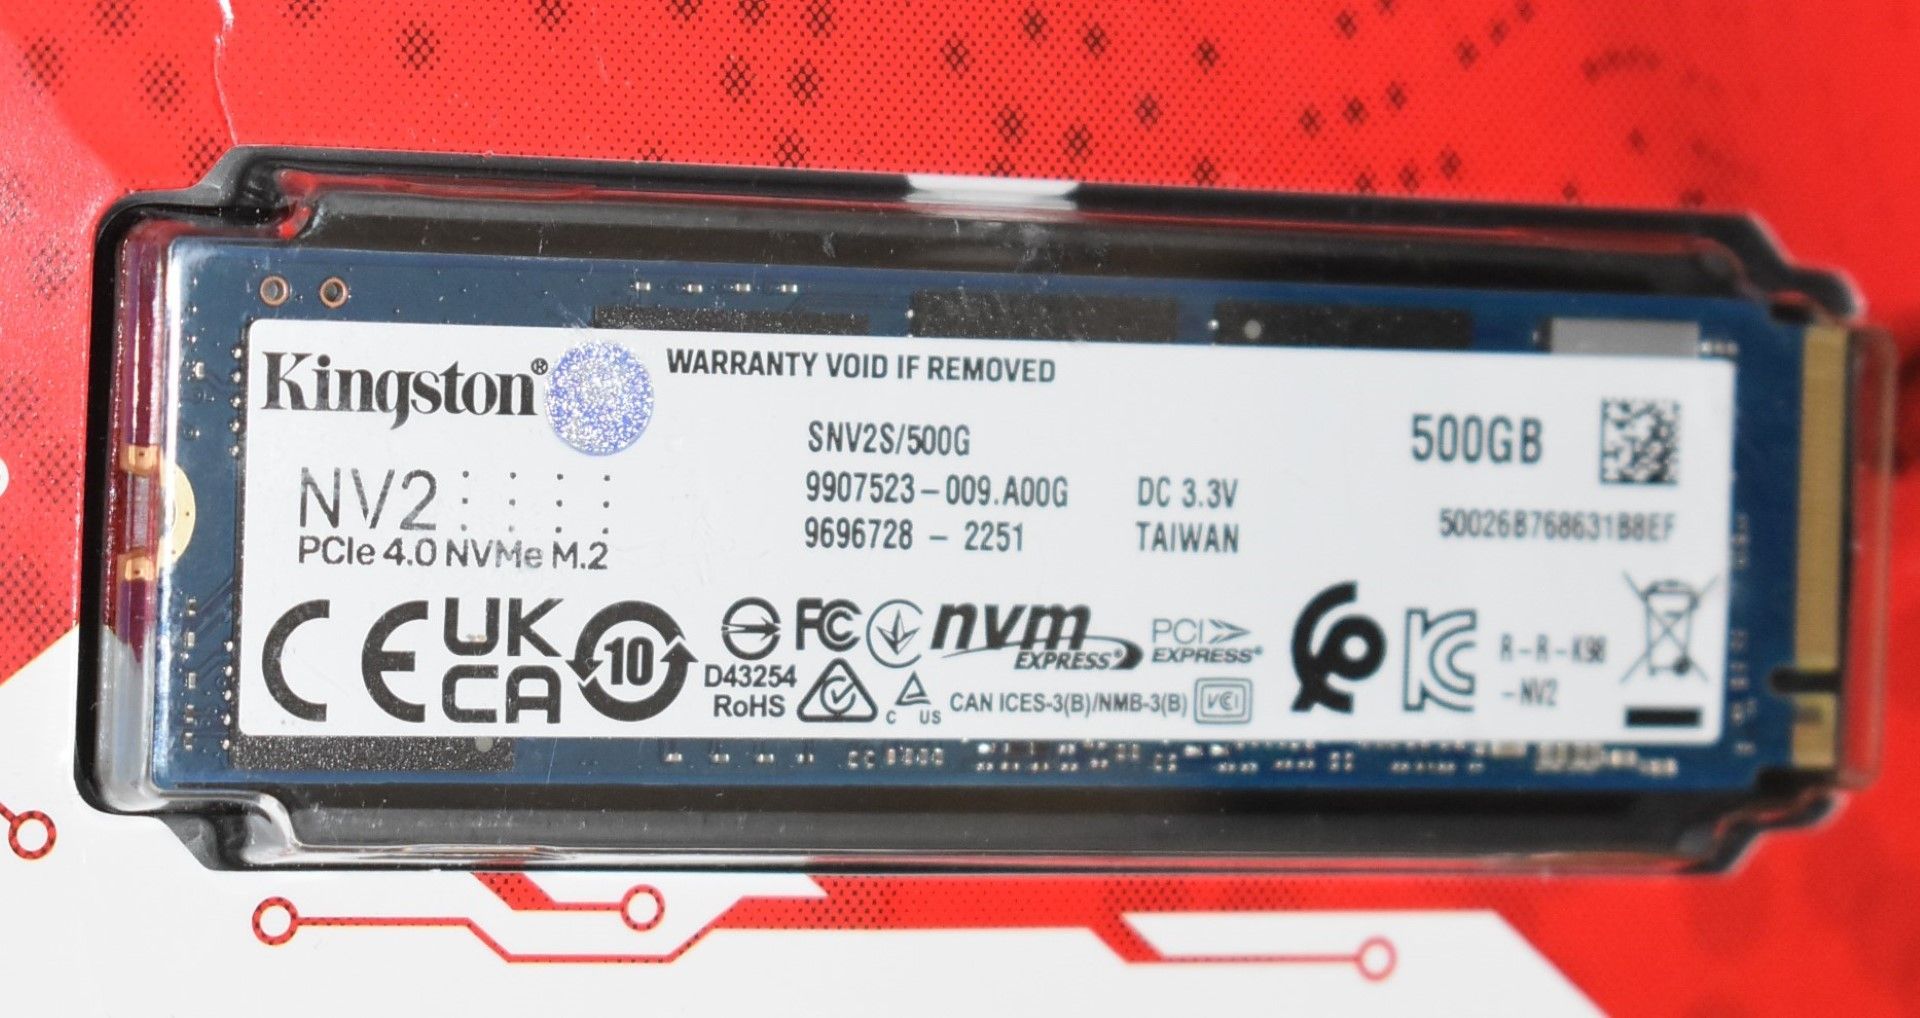 1 x Kingston NV2 500gb PCIe NVMe M.2 SSD Drive - New and Sealed - NO VAT ON THE HAMMER - CL010 - - Image 3 of 3